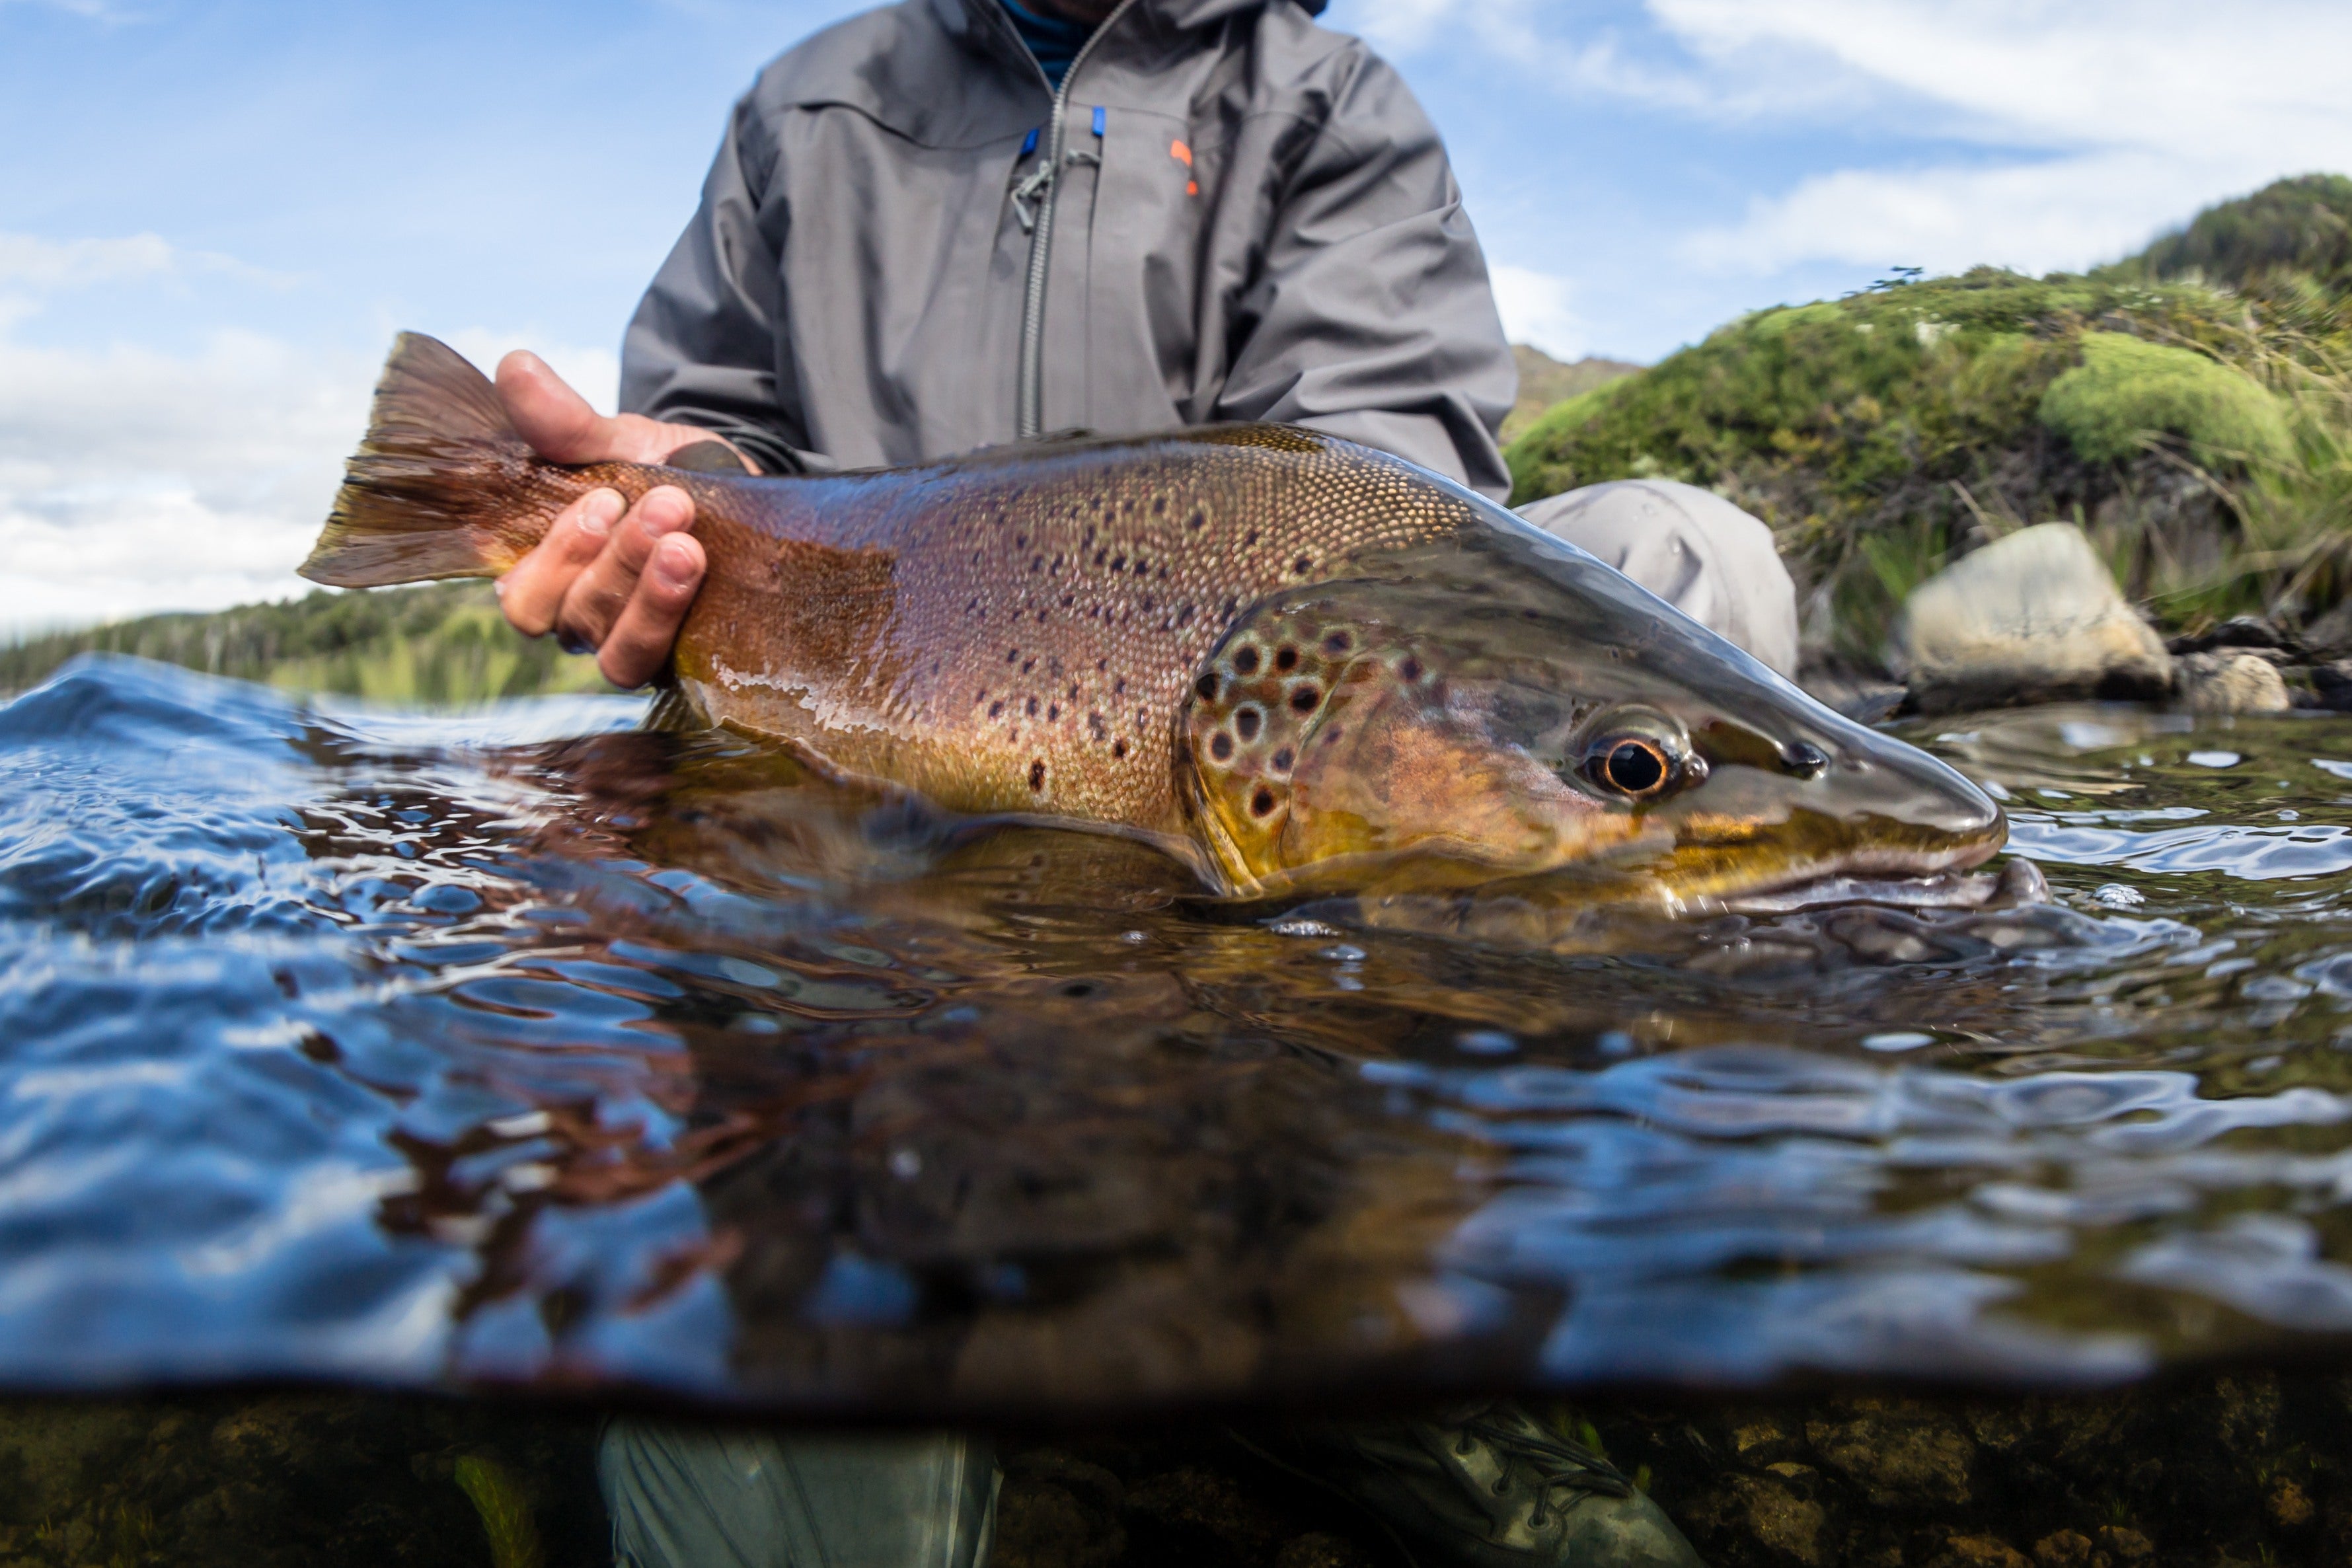 Outfitters Patagonia Fly Fishing Adventures - Day Tours - All You